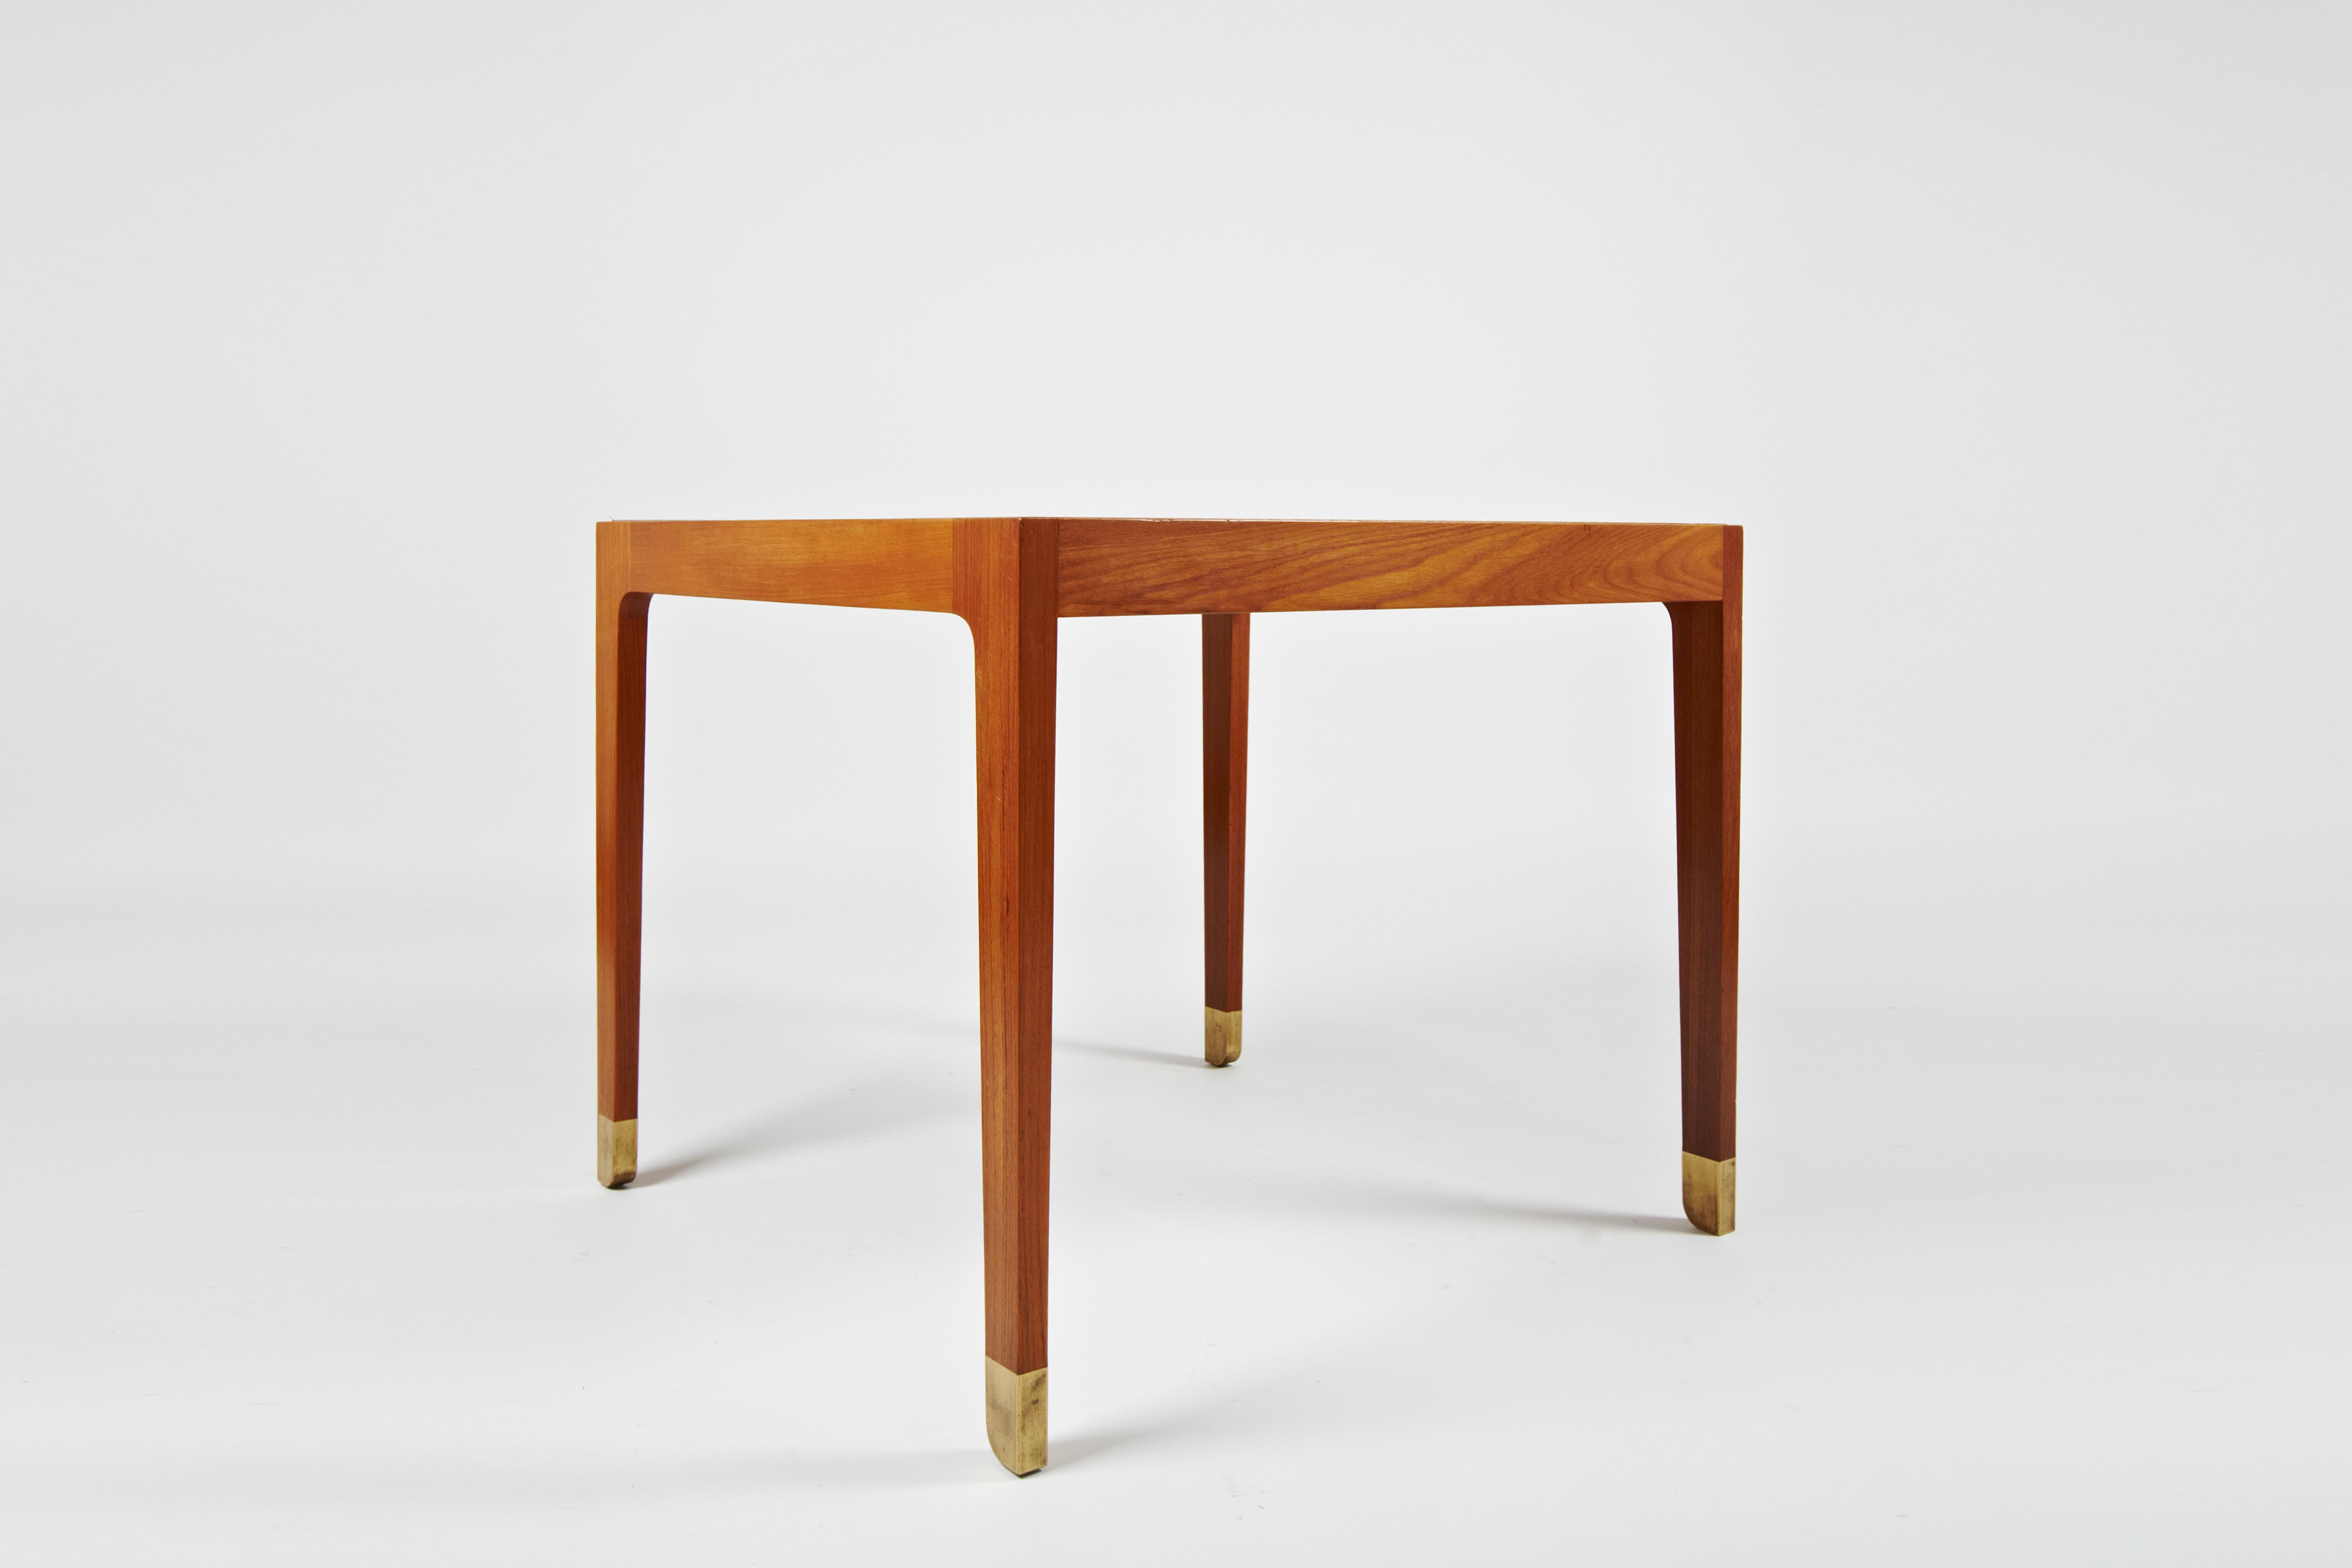 Teak Finn Juhl:  Exhibition tables made 1947 - for dining or cards - single or pair For Sale